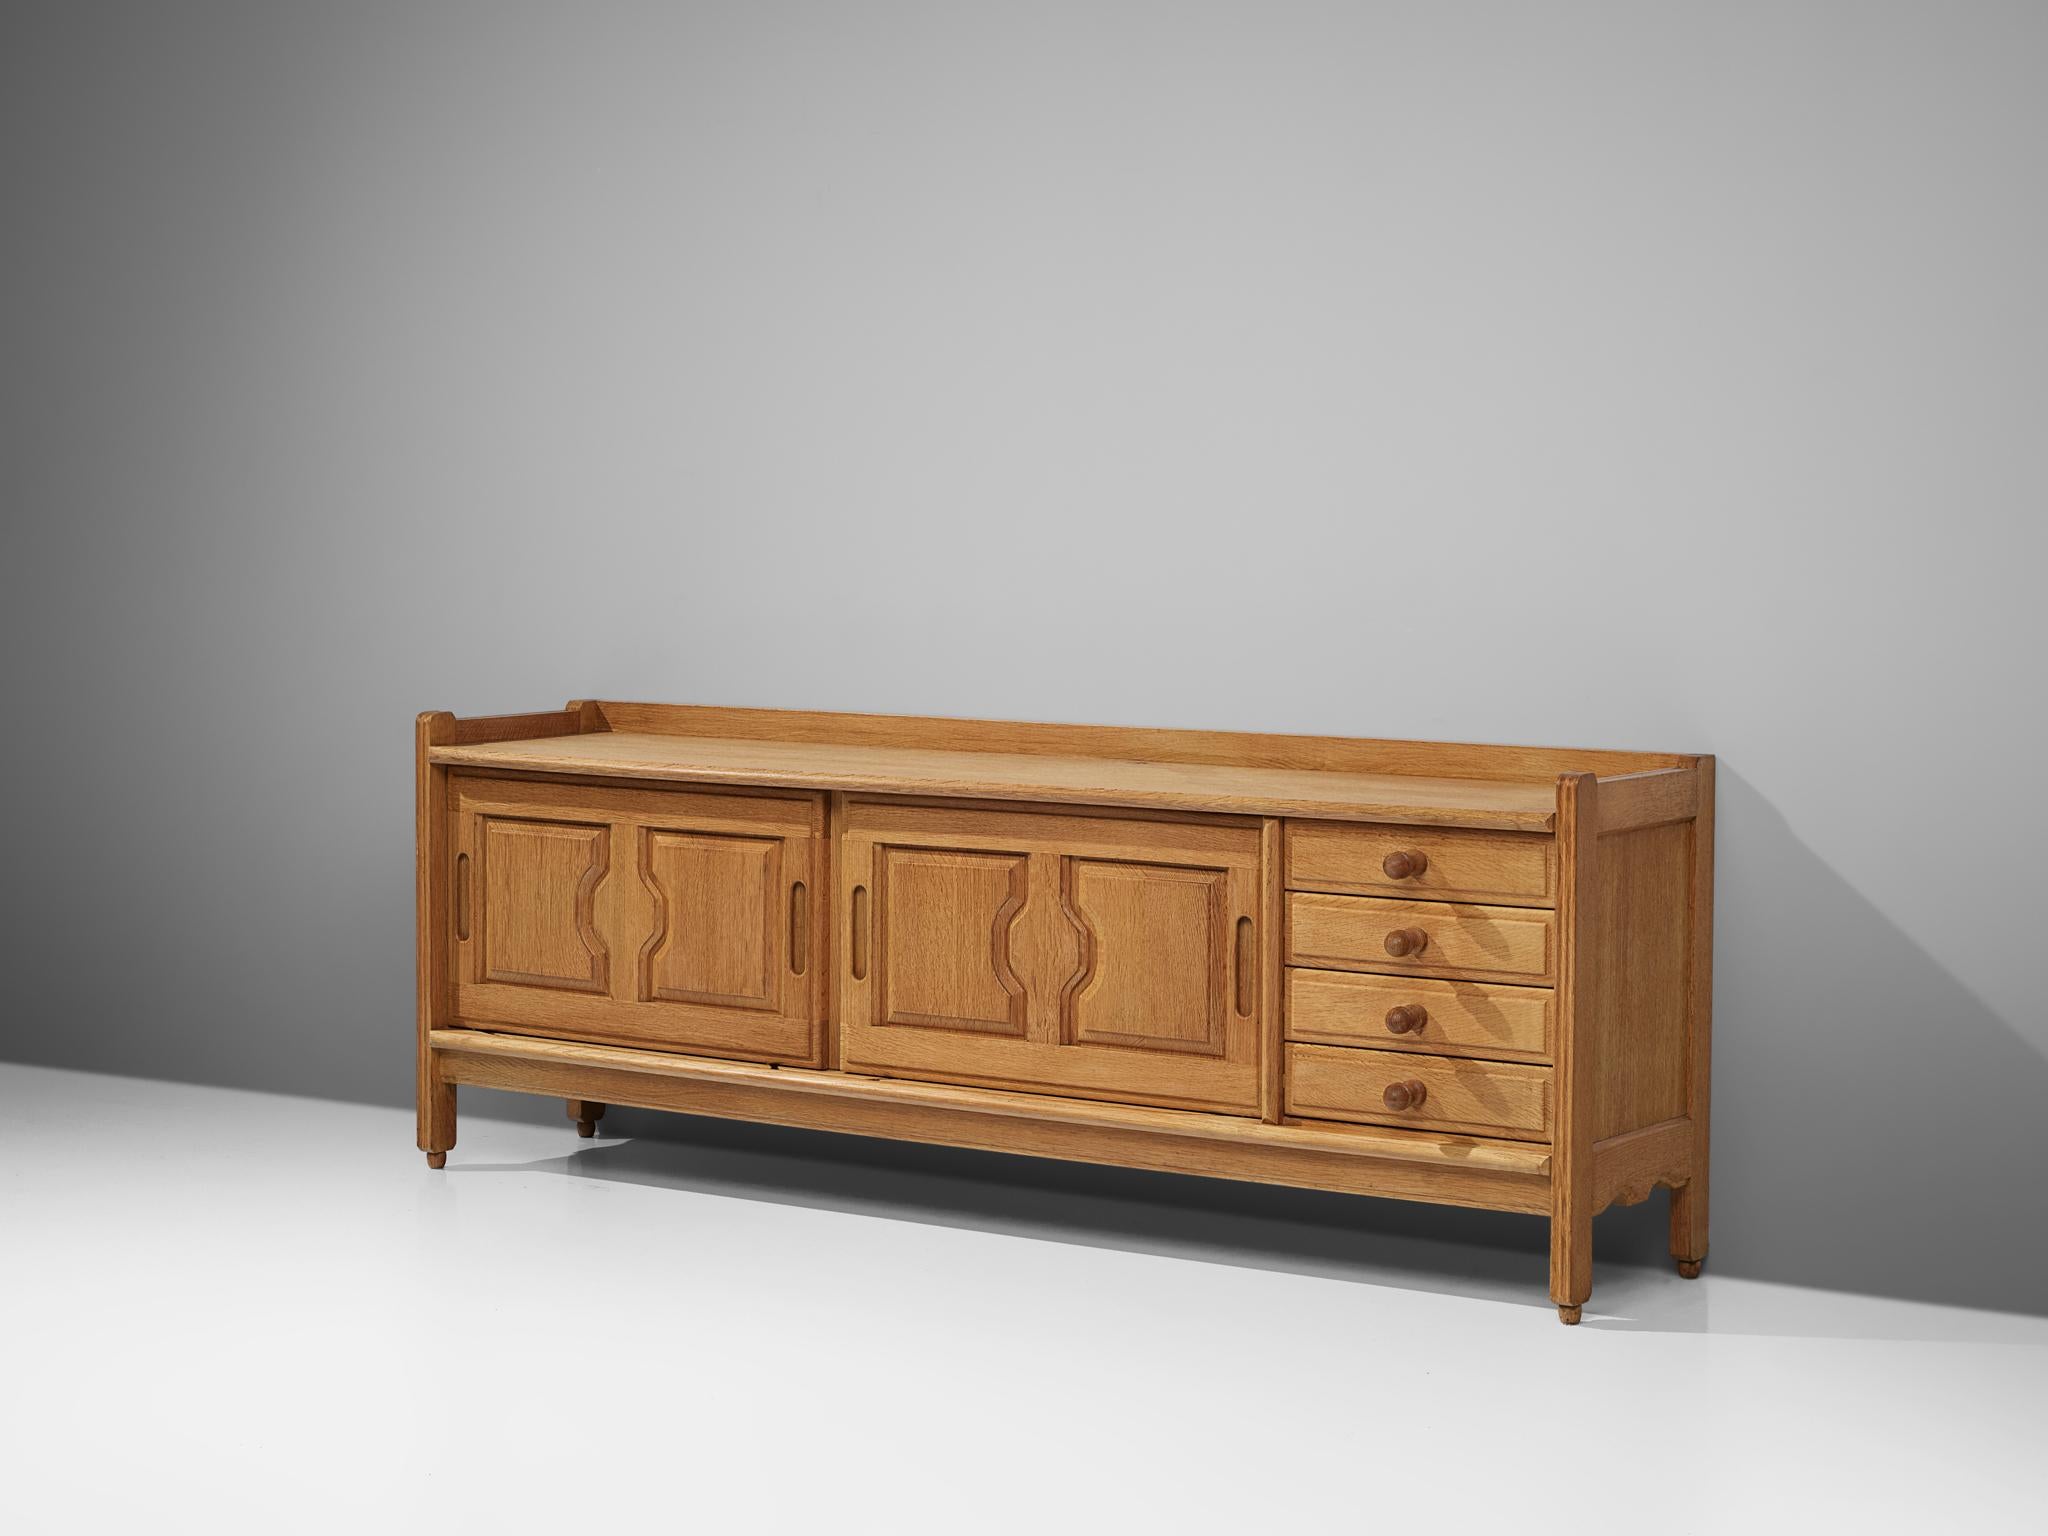 Guillerme et Chambron, sideboard, oak, France, 1960s.

Credenza in oak by French designers Guillerme & Chambron. This sideboard is equipped with two sliding-doors and four drawers on the right. The sliding doors are finished with a carved pattern.